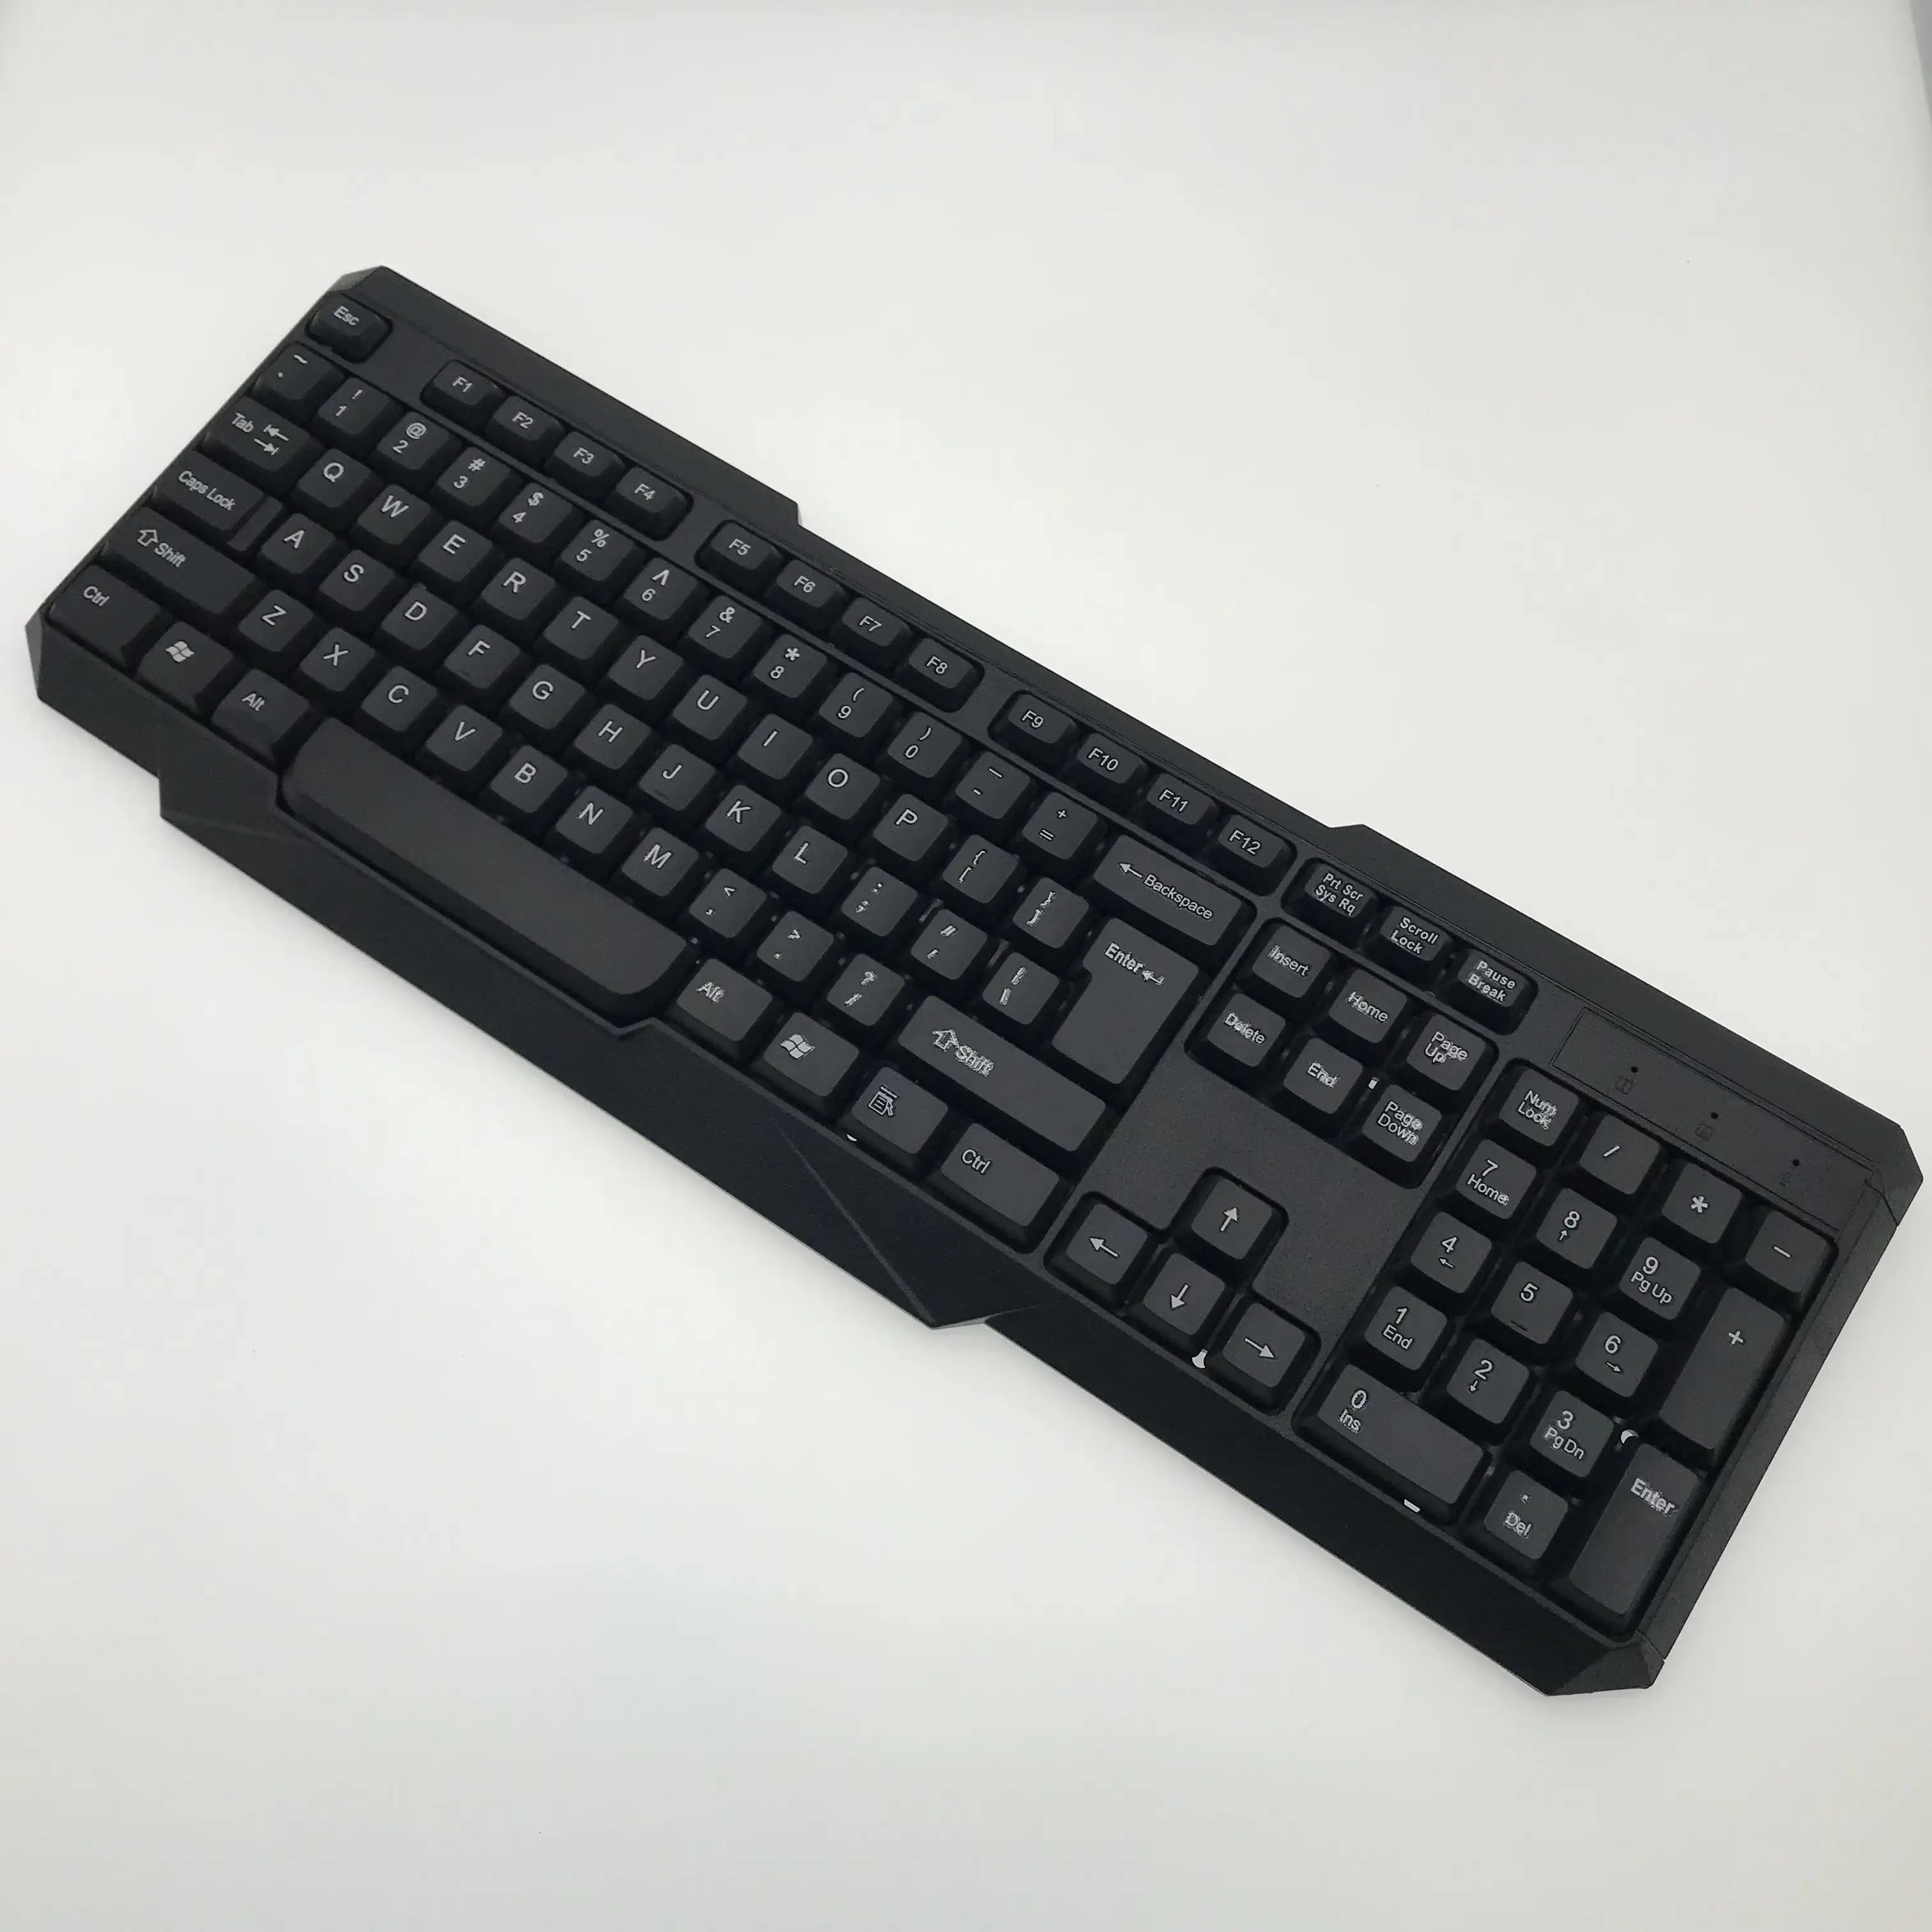 good quality gaming USB wired for keyboard mouse combo OEM different layout desktop full size best wired slim spanish keyboard